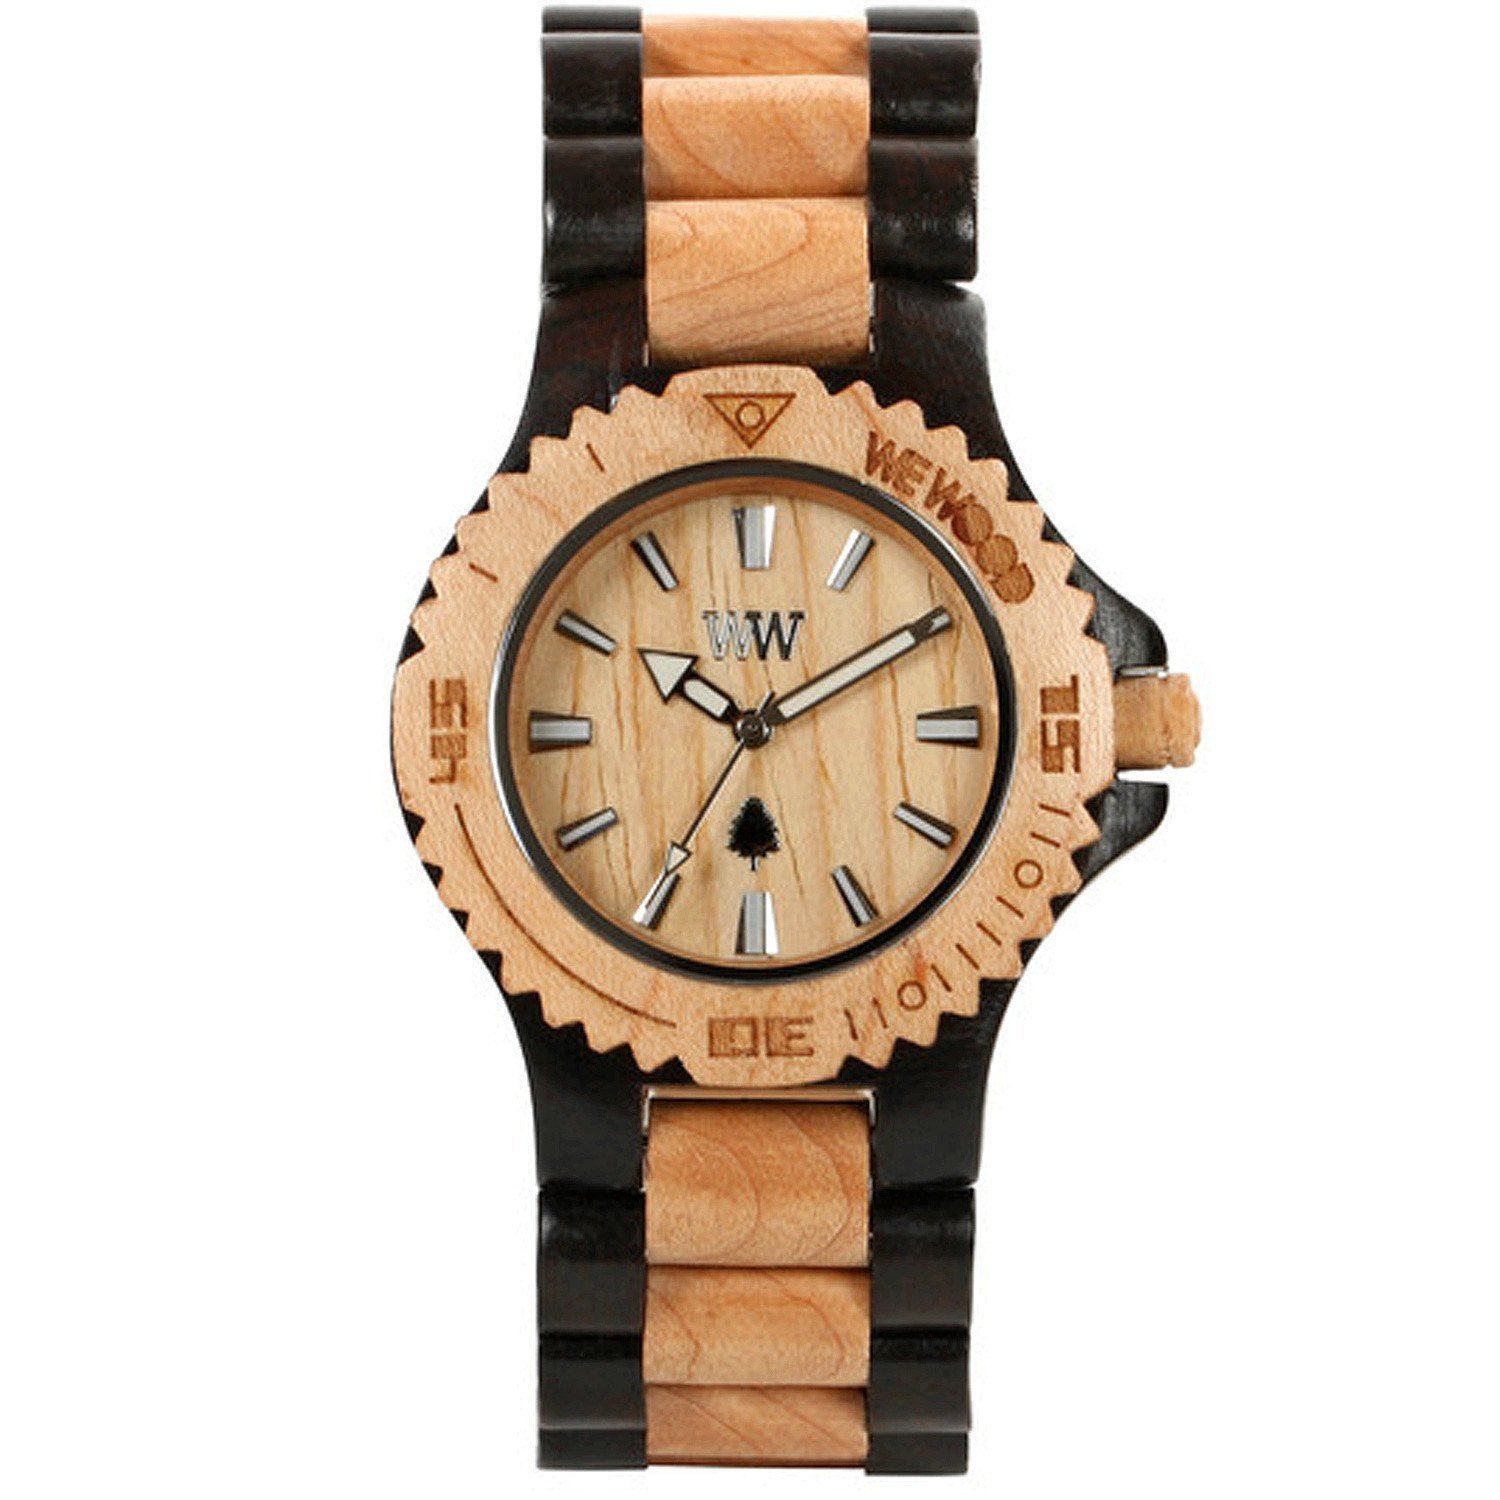 WeWOOD Date Watch | General | Pinterest | Products